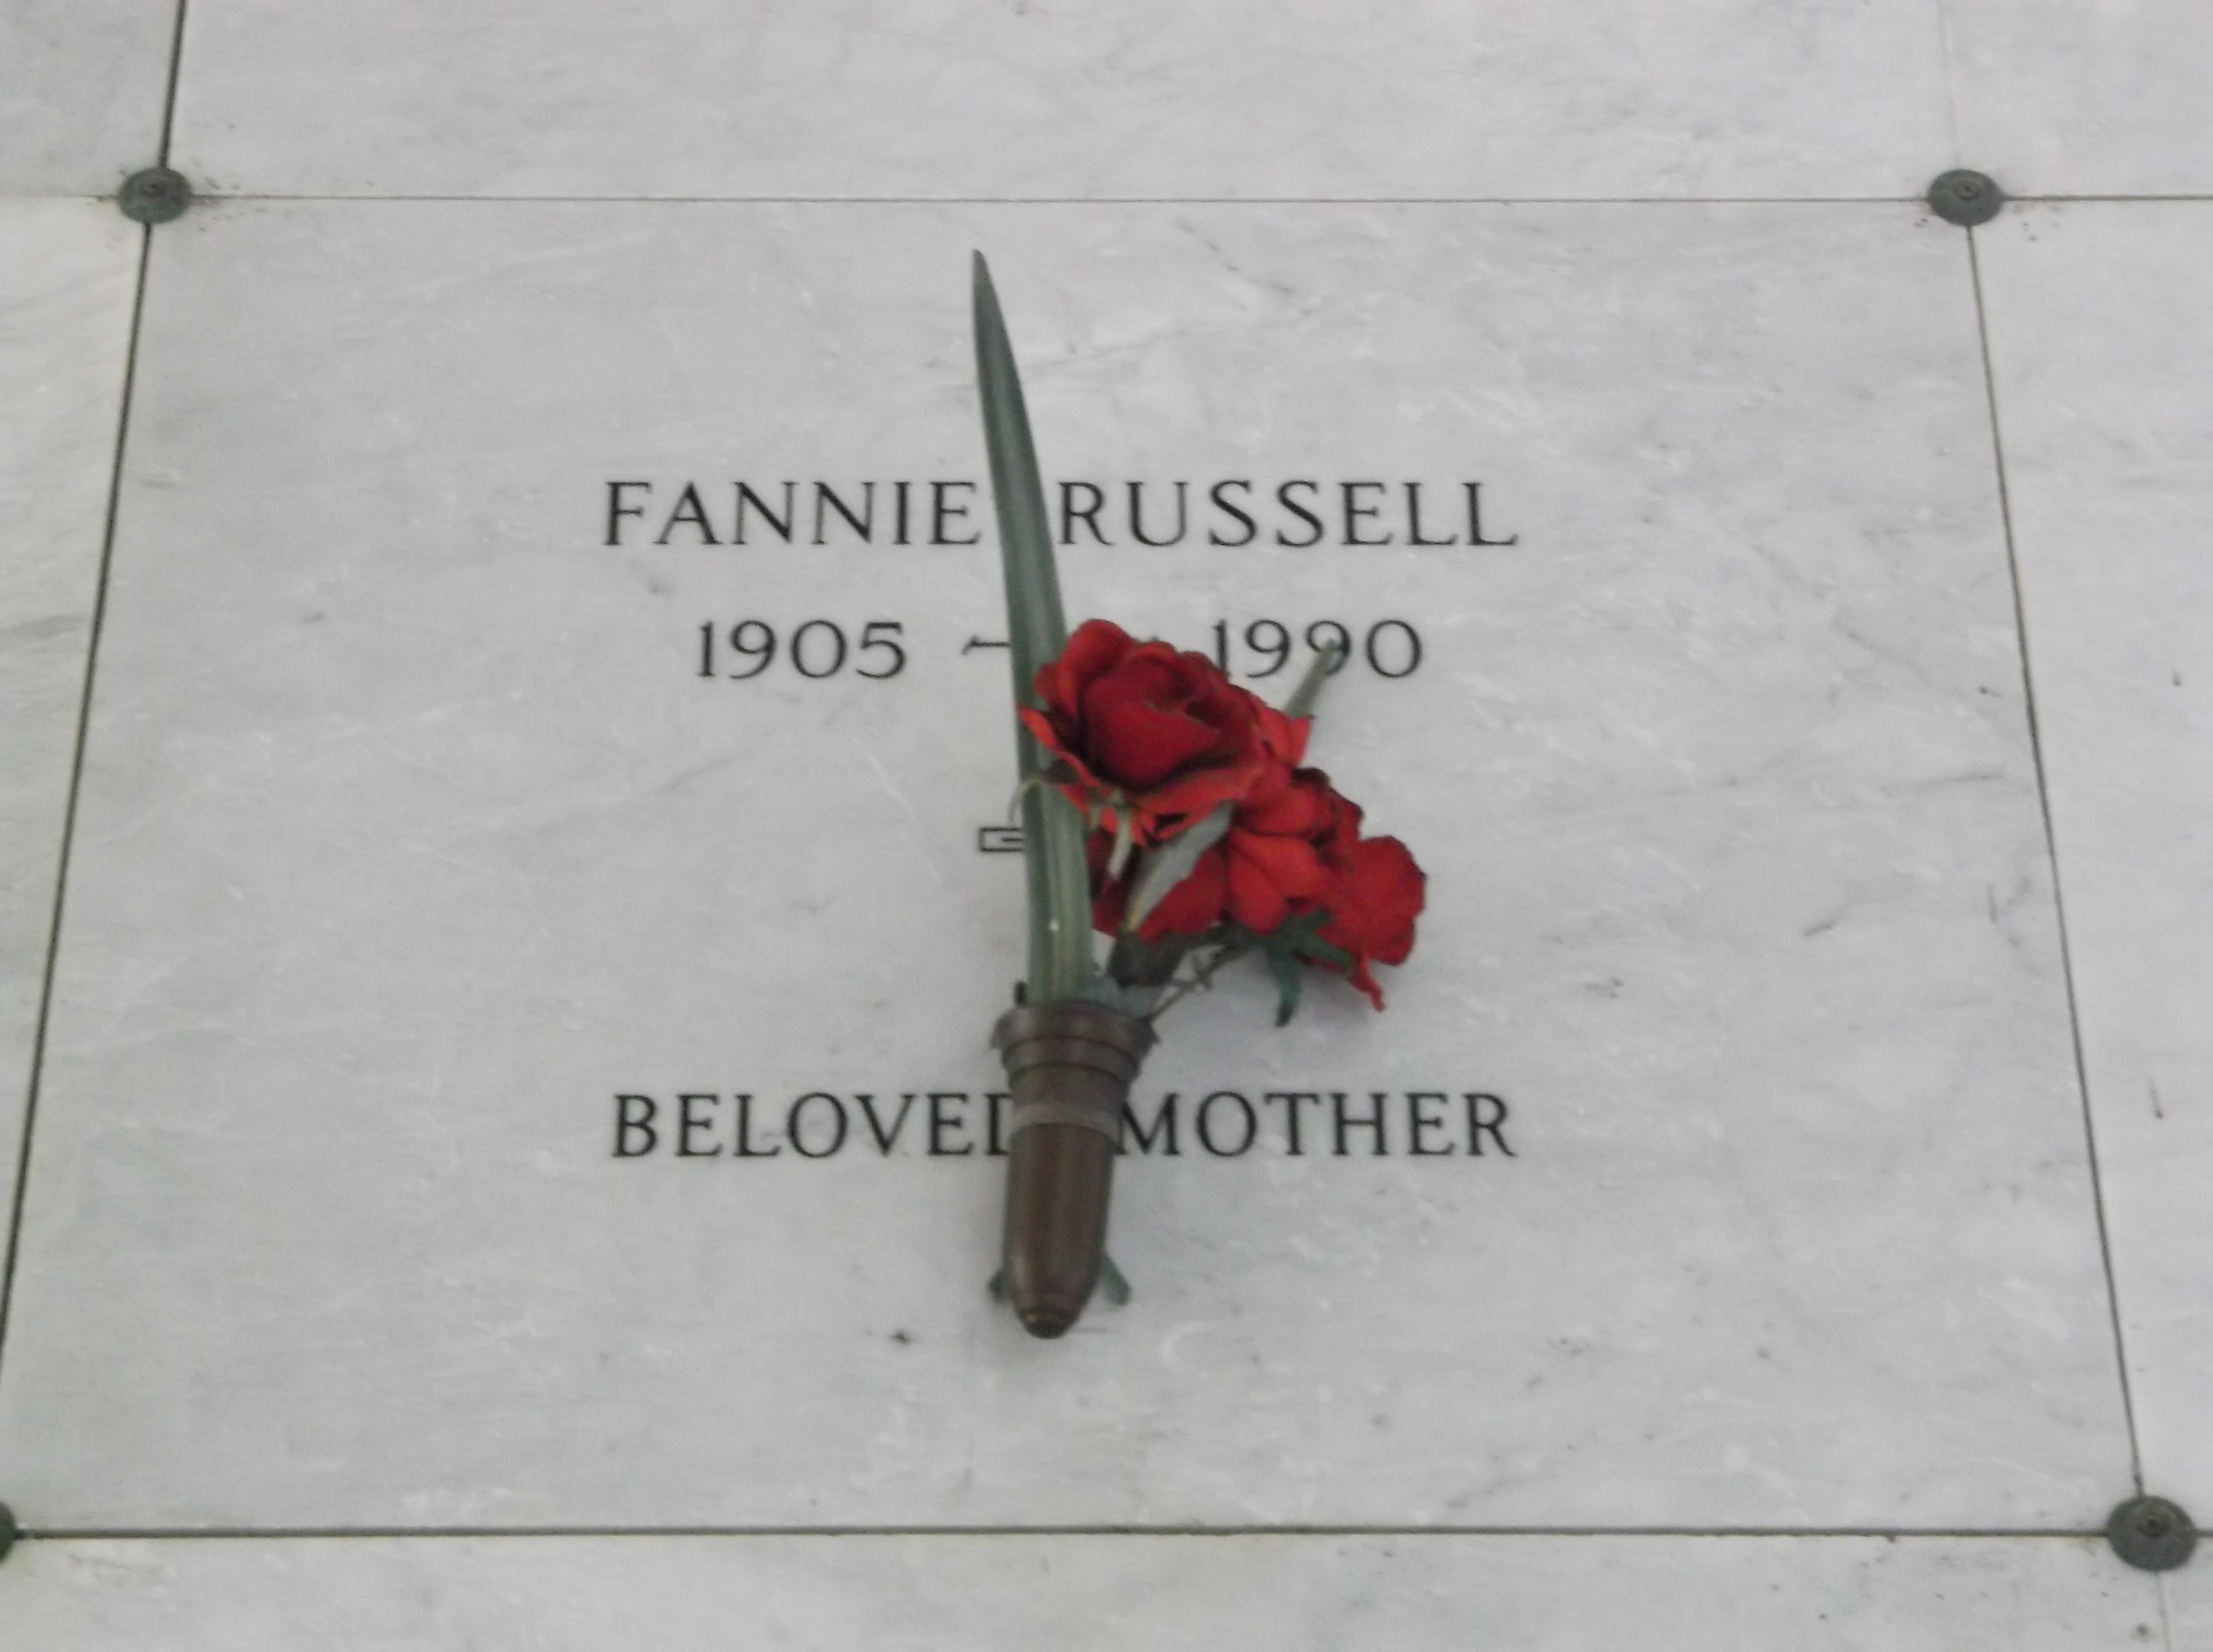 Fannie Russell